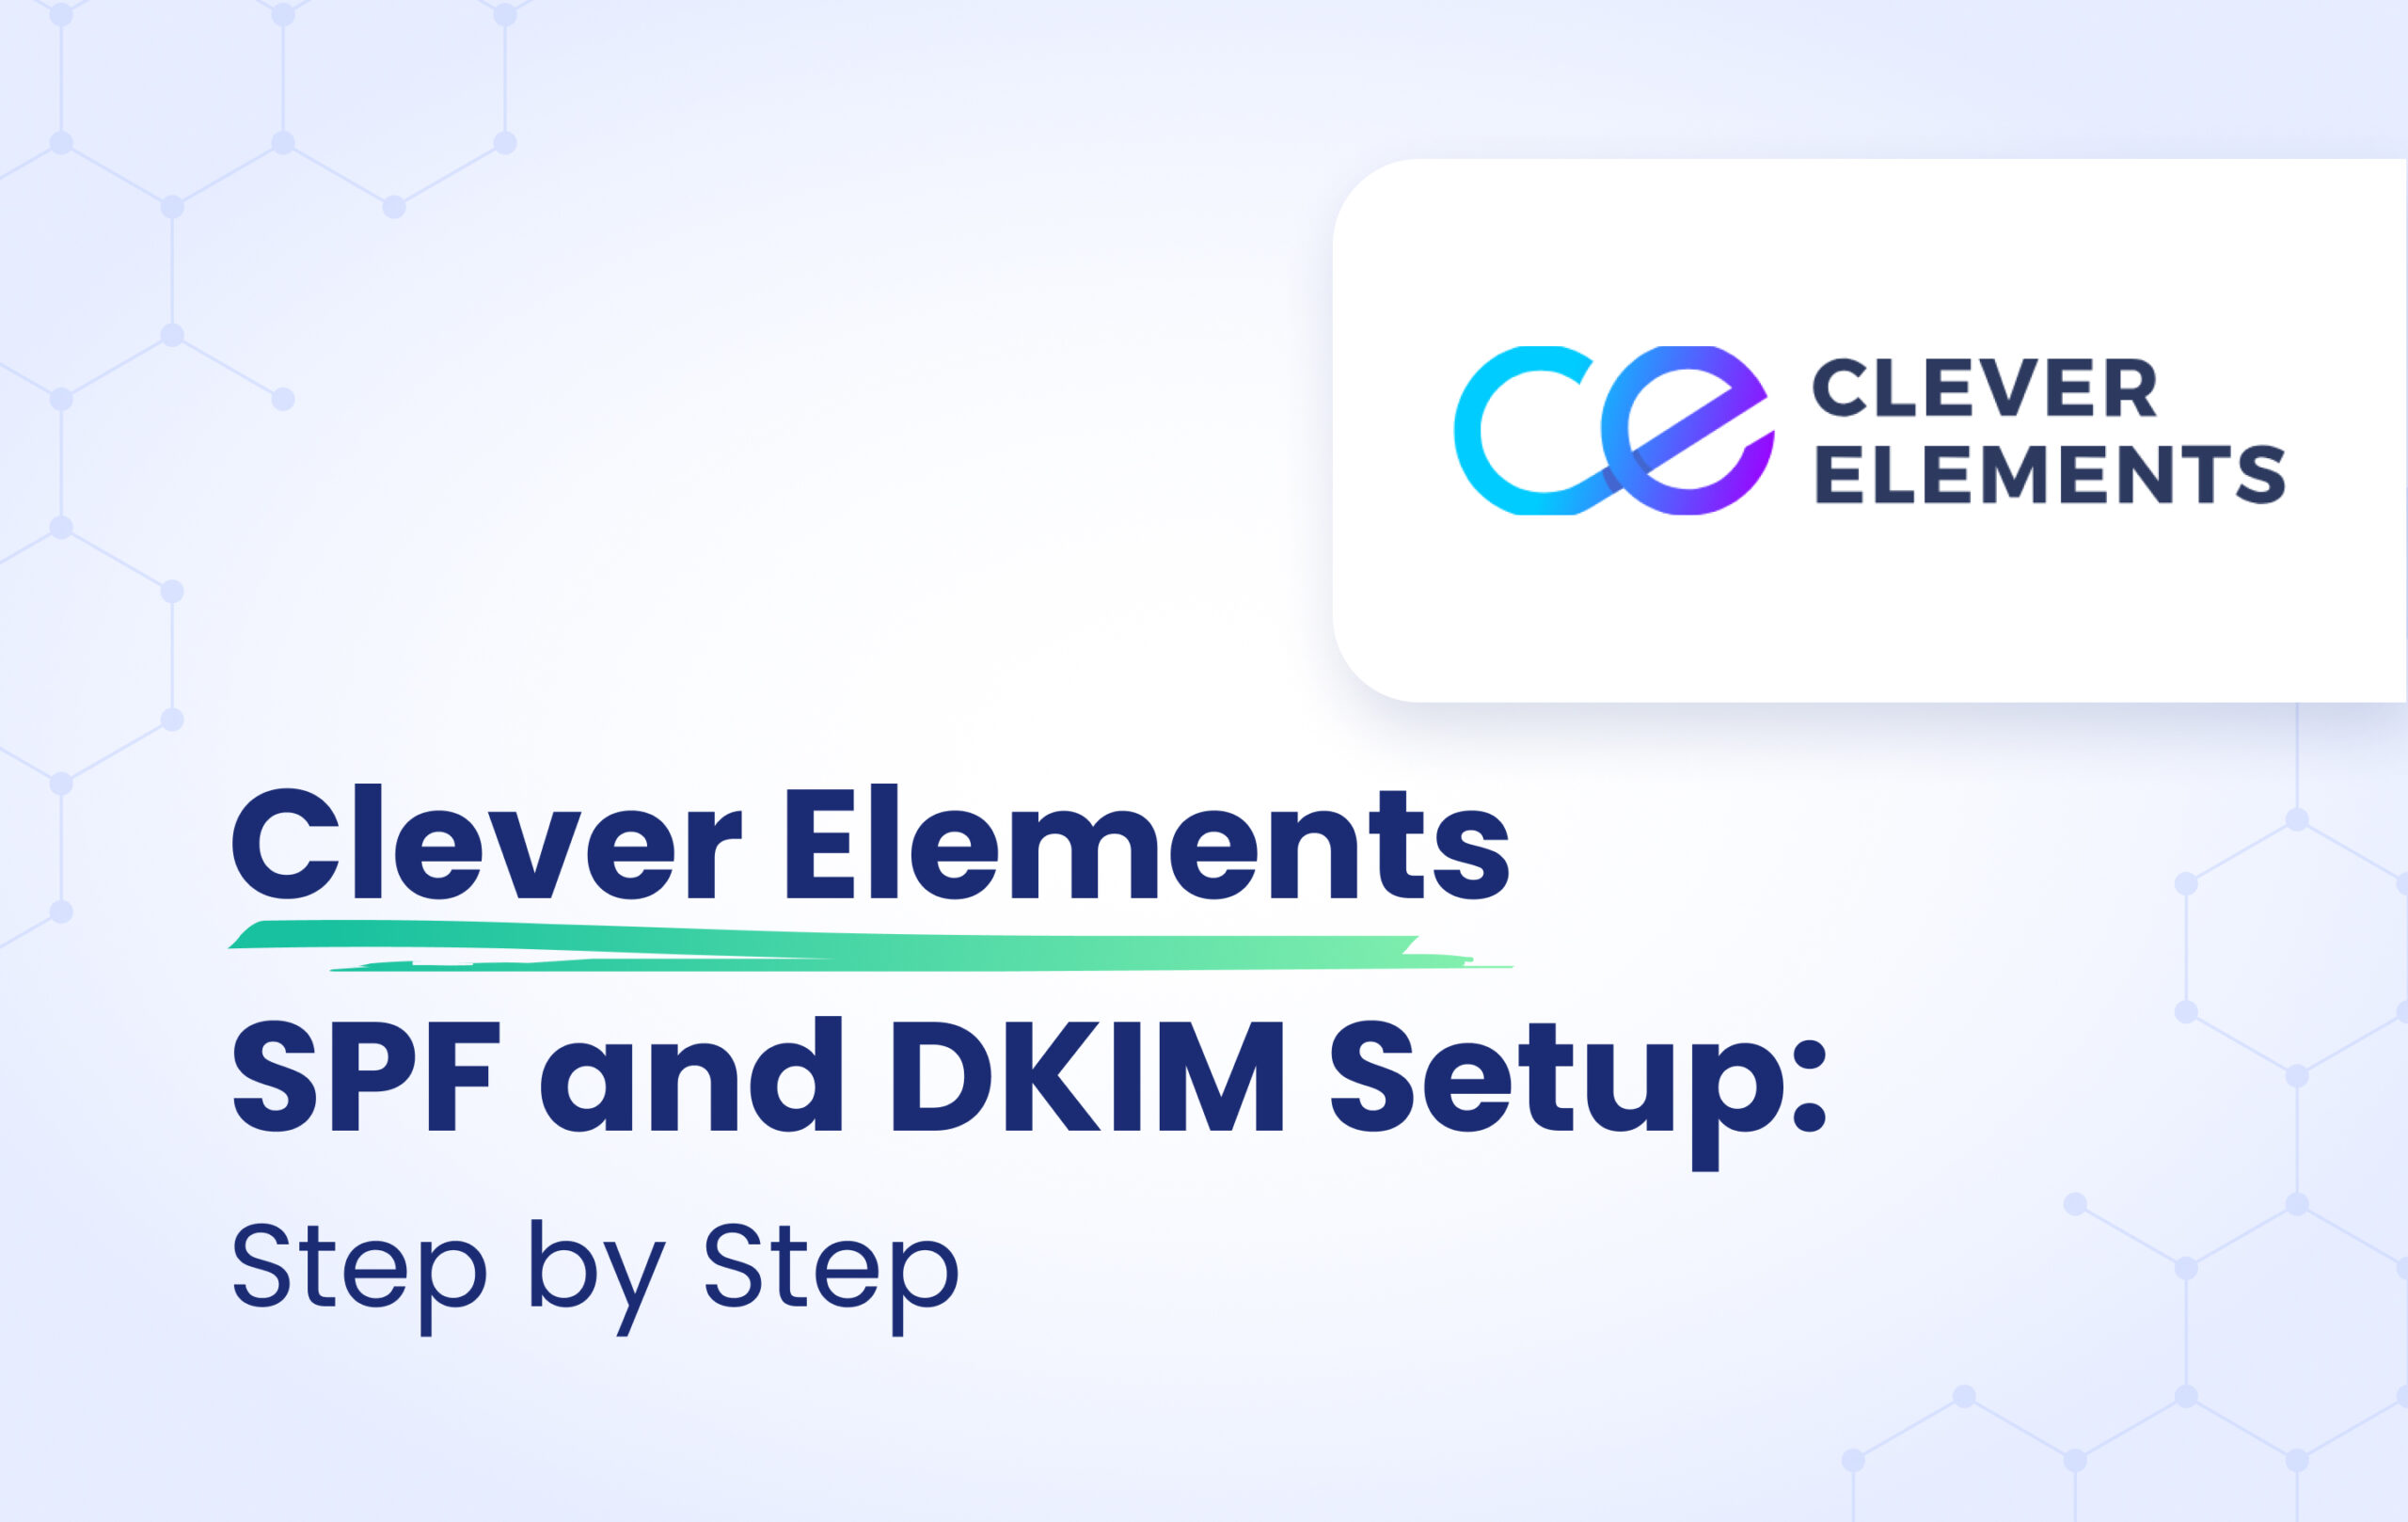 Clever Elements SPF and DKIM configuration